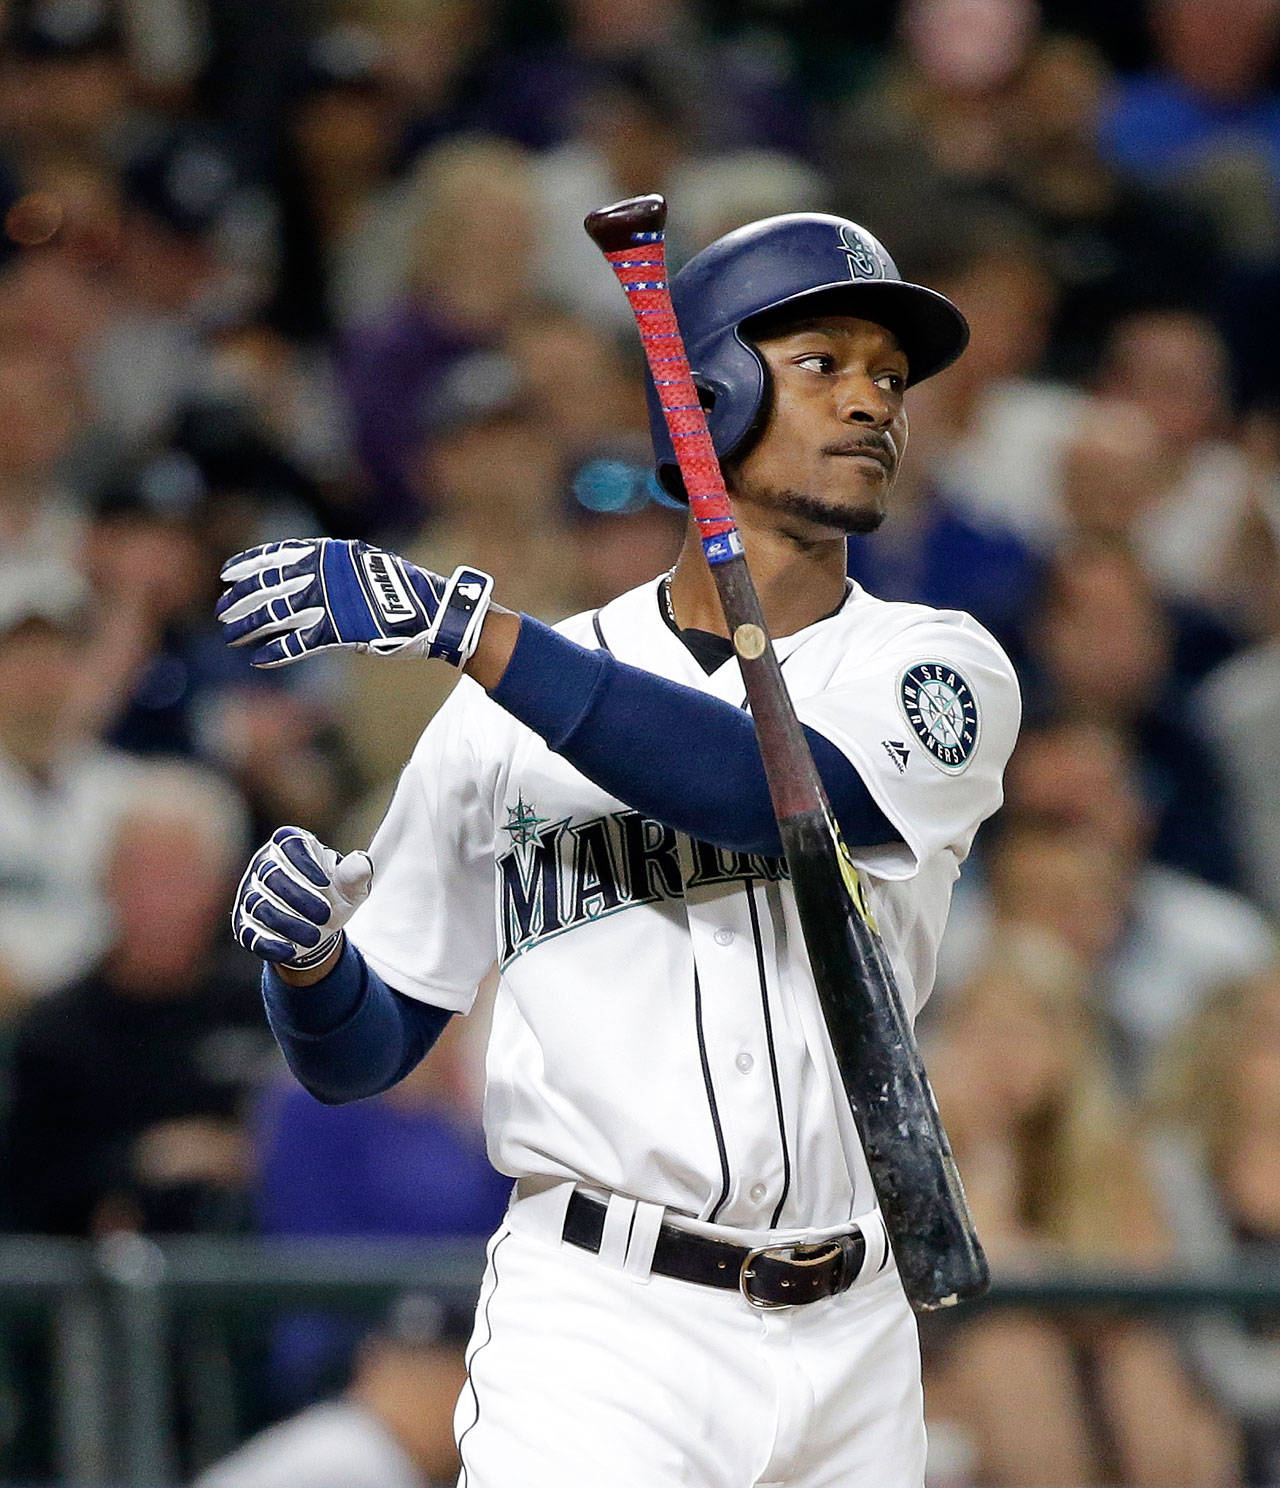 Seattle’s Jarrod Dyson tosses aside his bat after striking out against the New York Yankees during the eighth inning of Thursday’s game in Seattle. (AP Photo/Elaine Thompson)